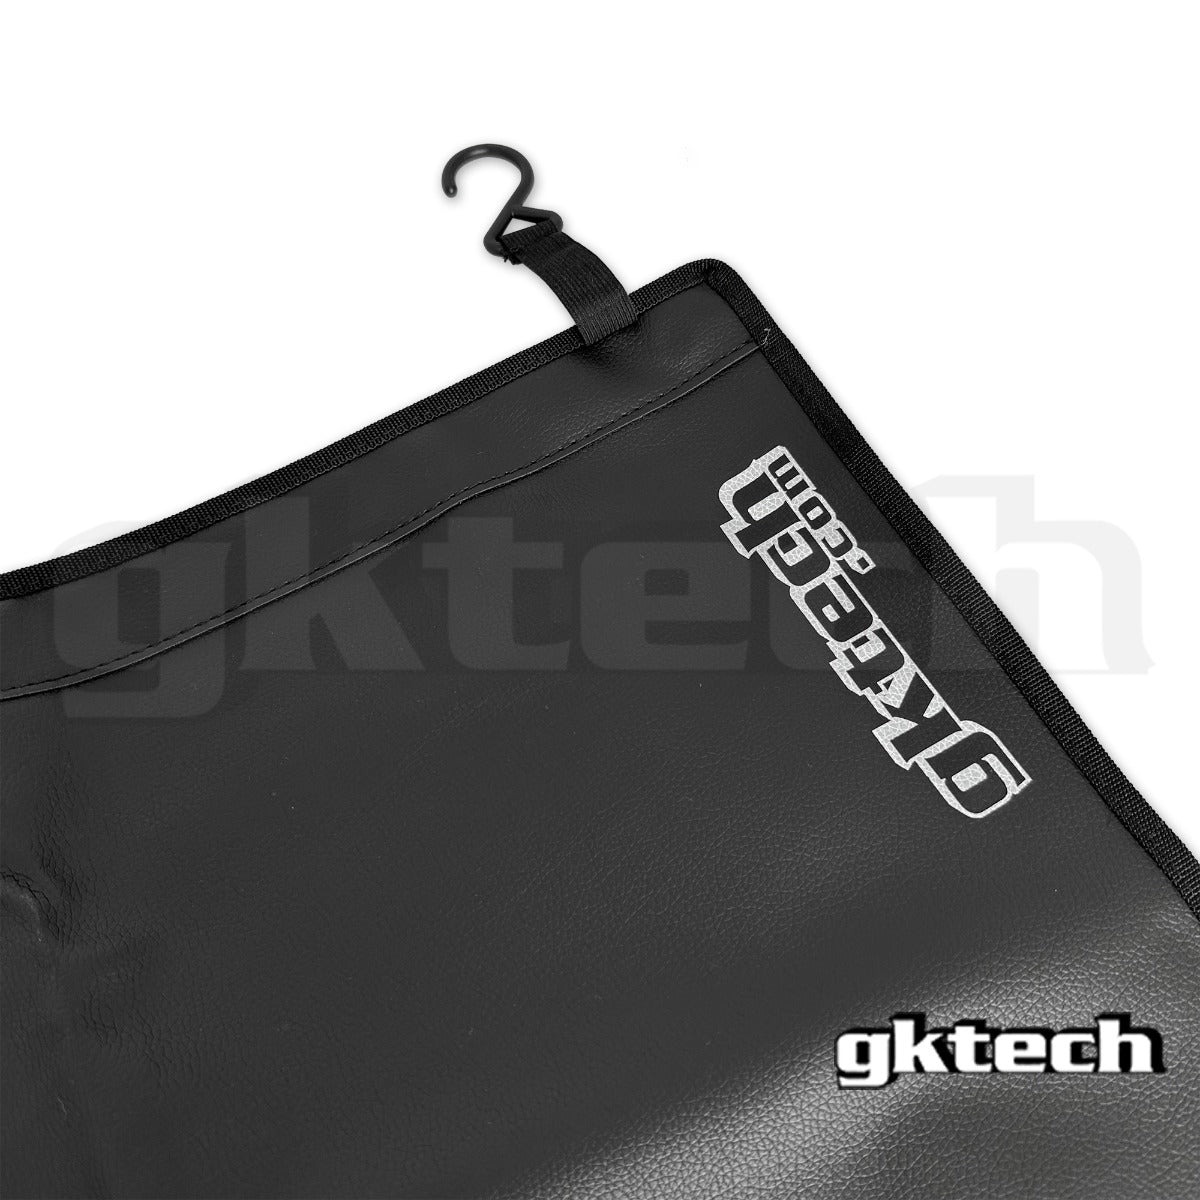 GKTECH branded guard protector